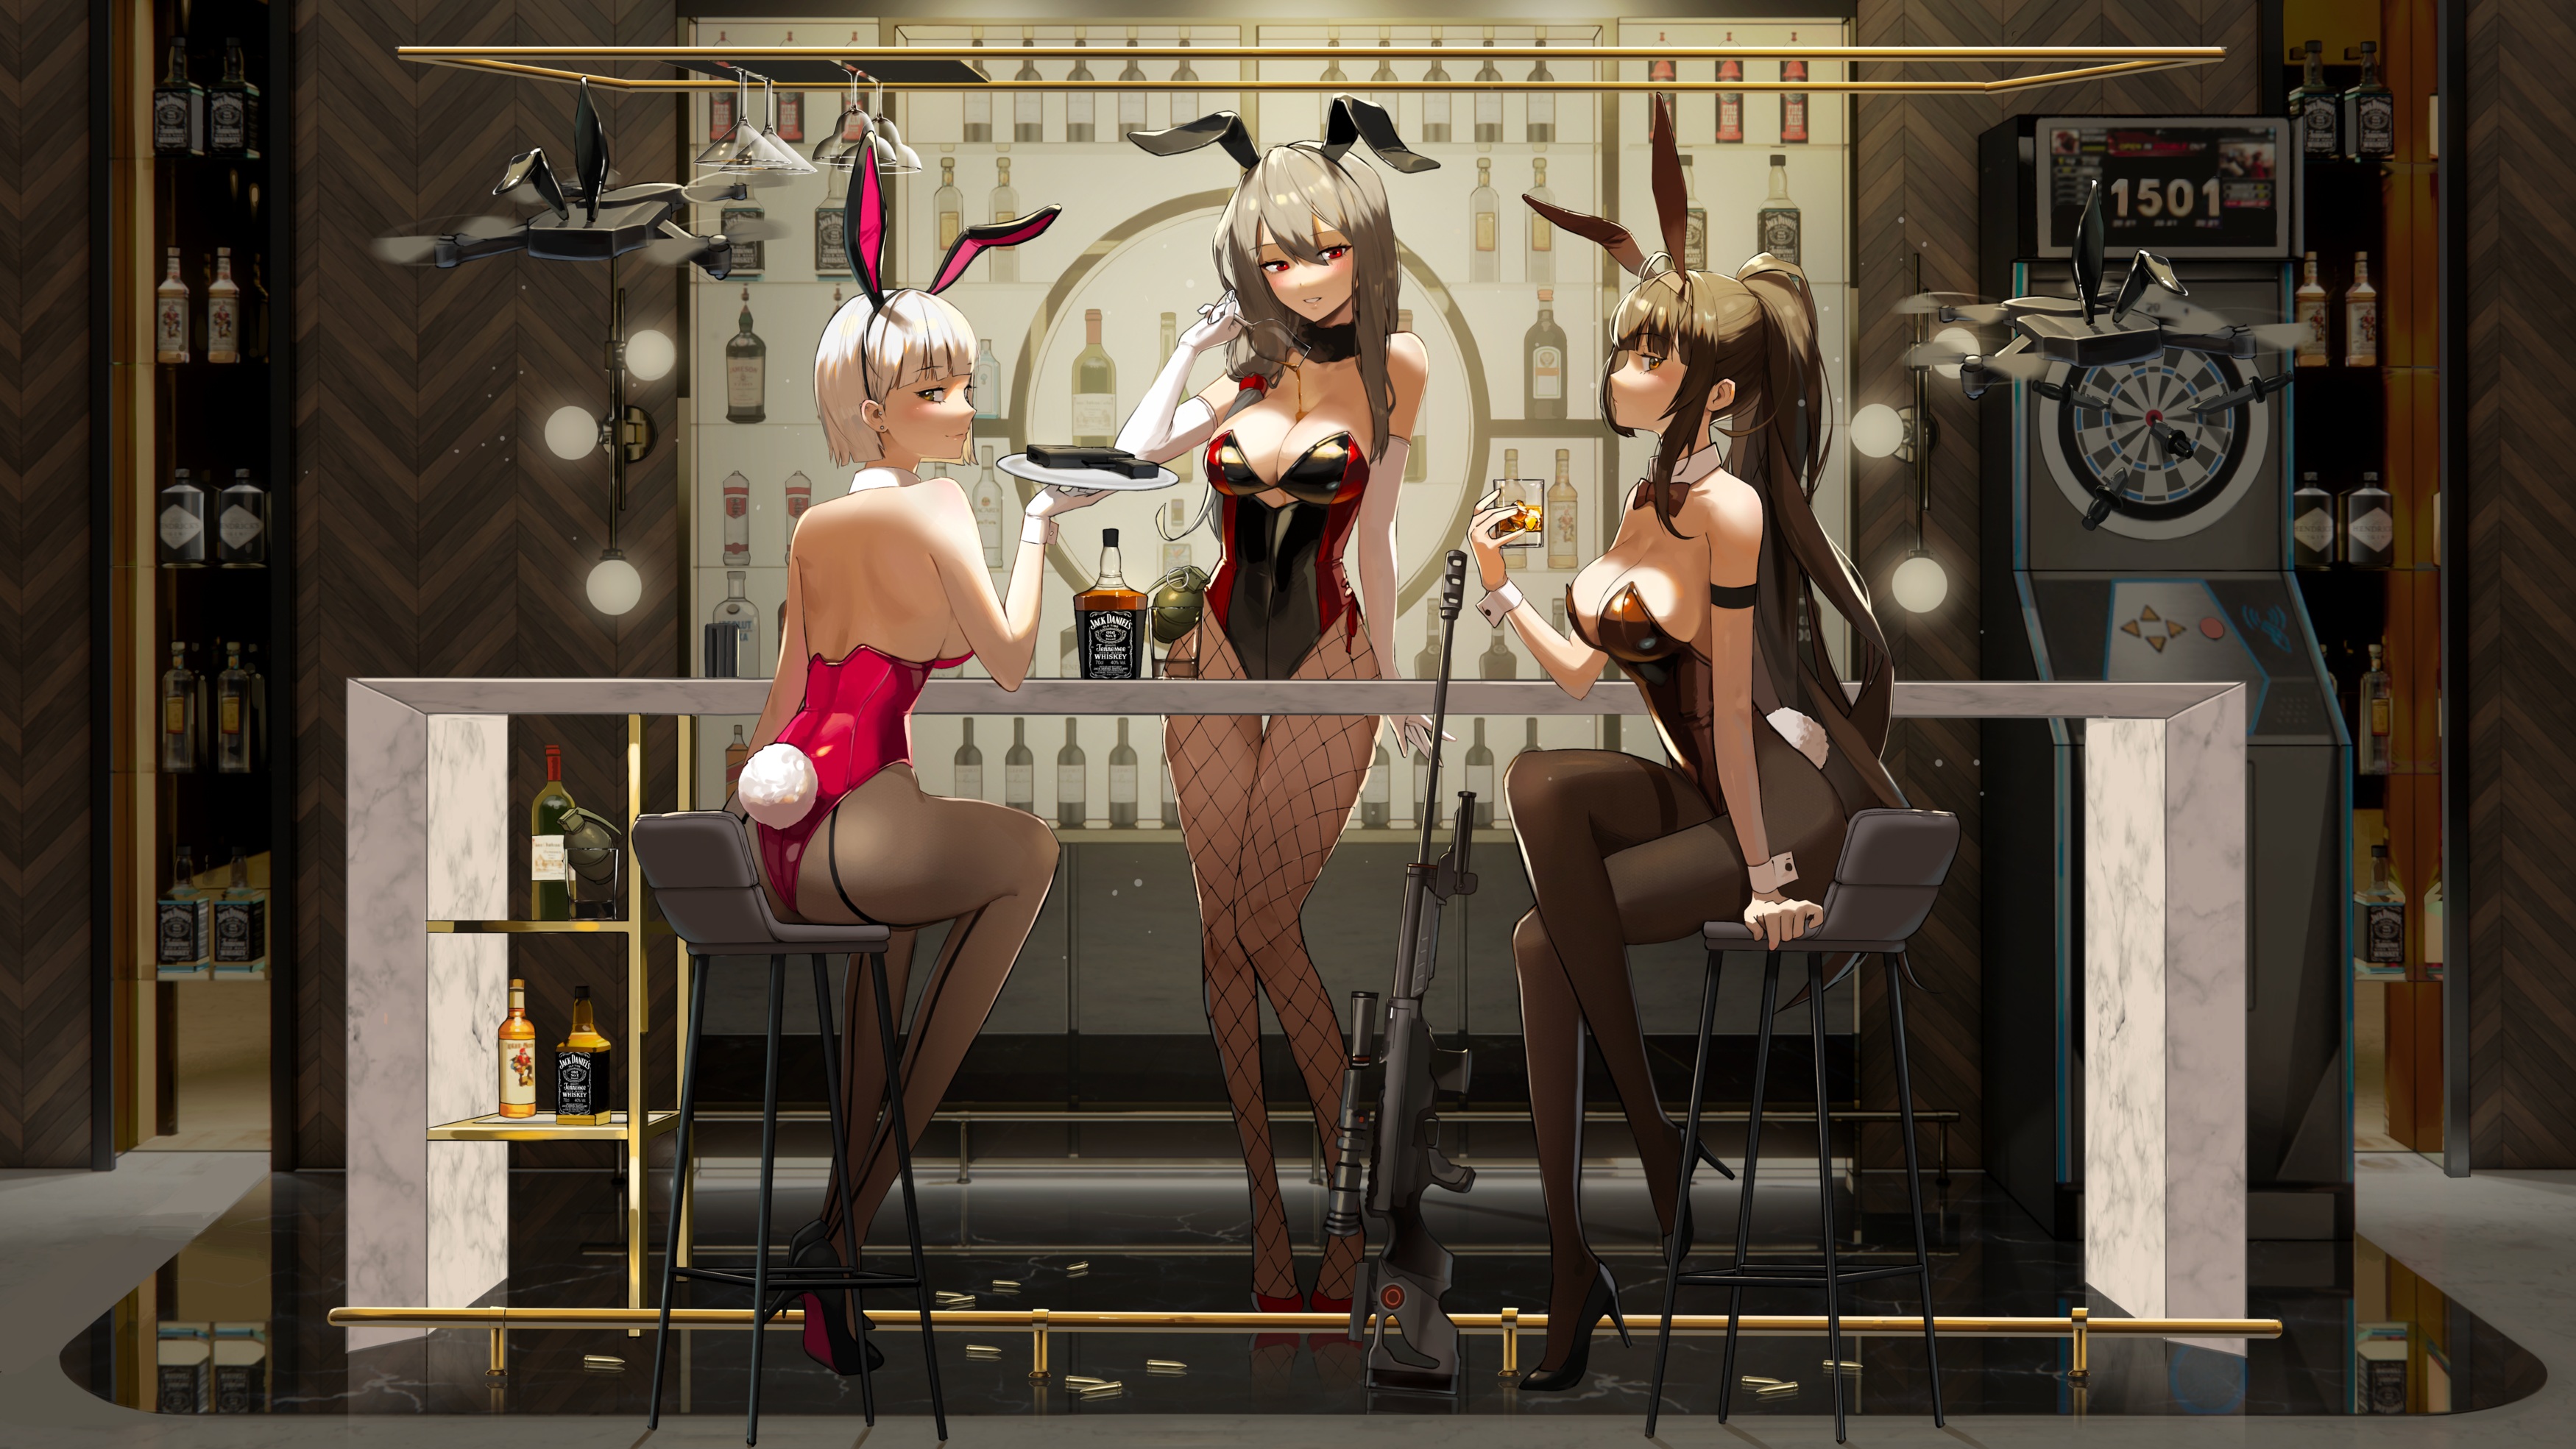 Anime 3500x1969 anime anime girls bunny suit bunny ears bunny tail bareback fishnet stockings chair alcohol bow tie cleavage big boobs wine glass elbow gloves gloves legs crossed gun girls with guns sniper rifle looking back women trio looking at viewer stools group of women heels Pixiv